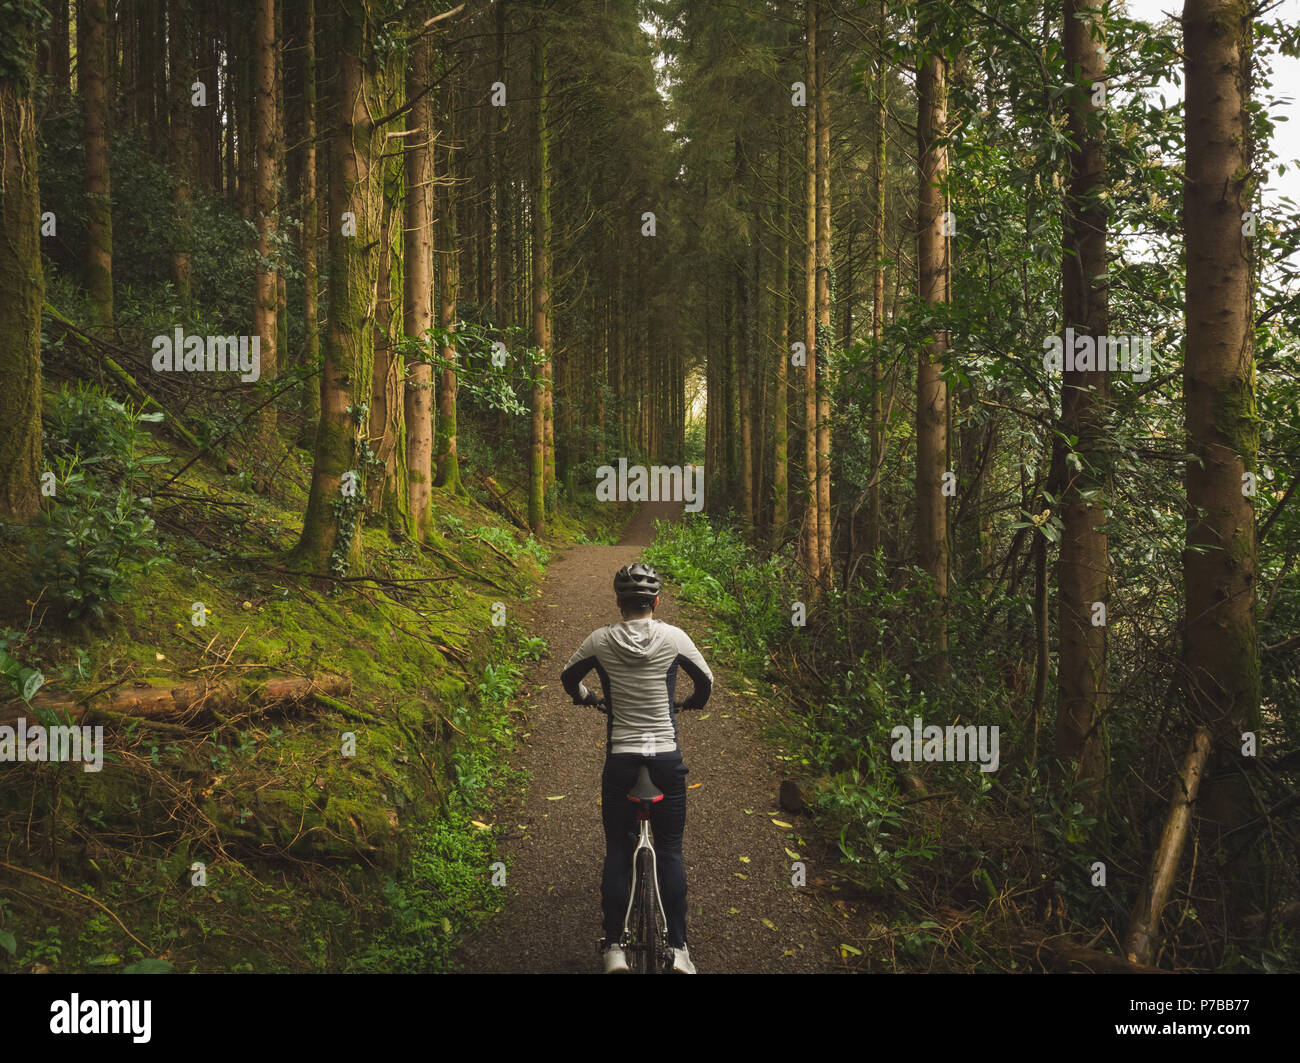 Cyclist on bicycle in lush forest Stock Photo